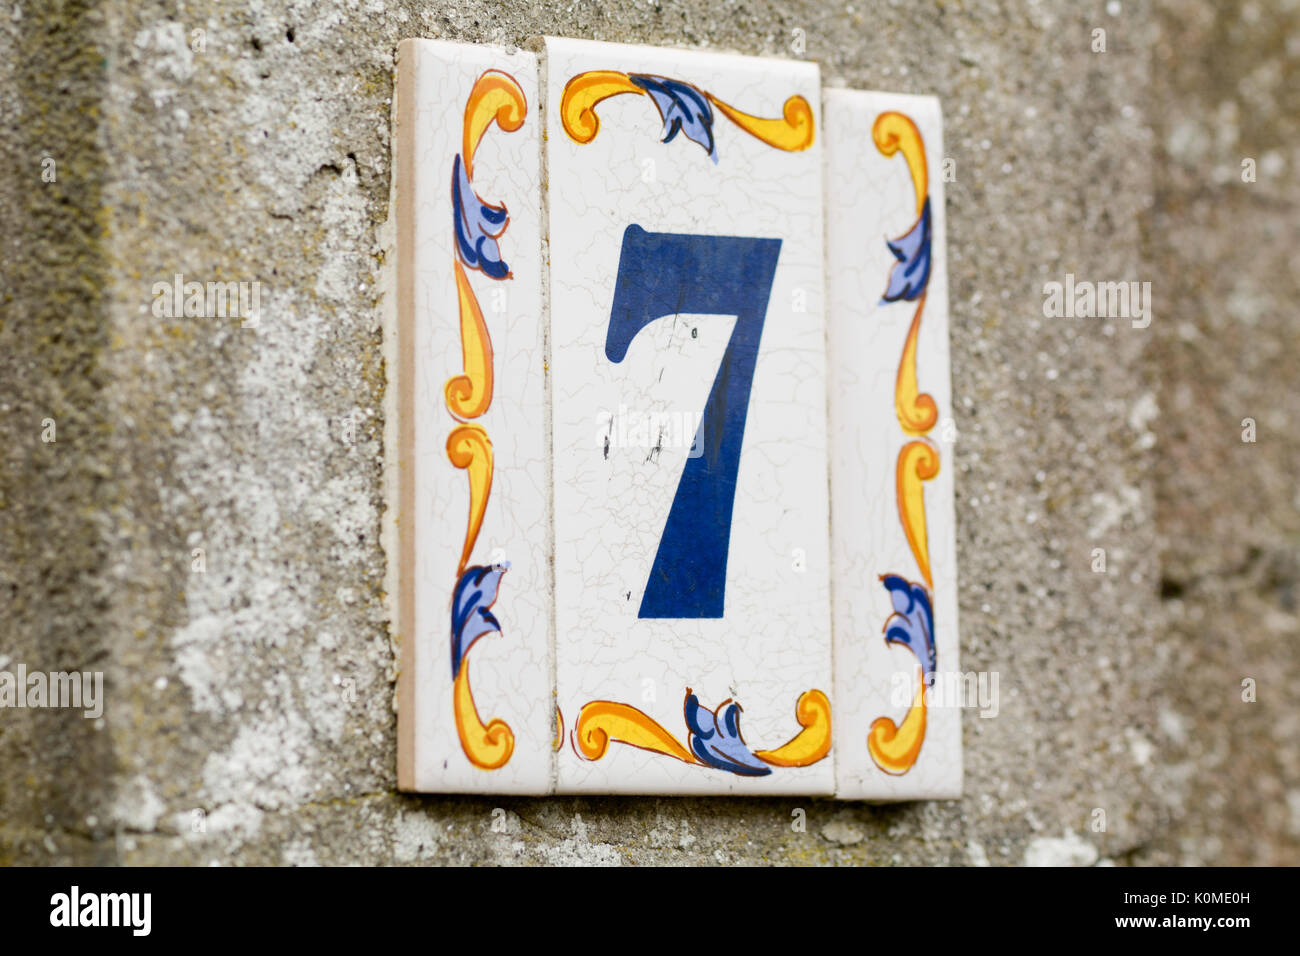 House number 7 sign on ceramic tile Stock Photo